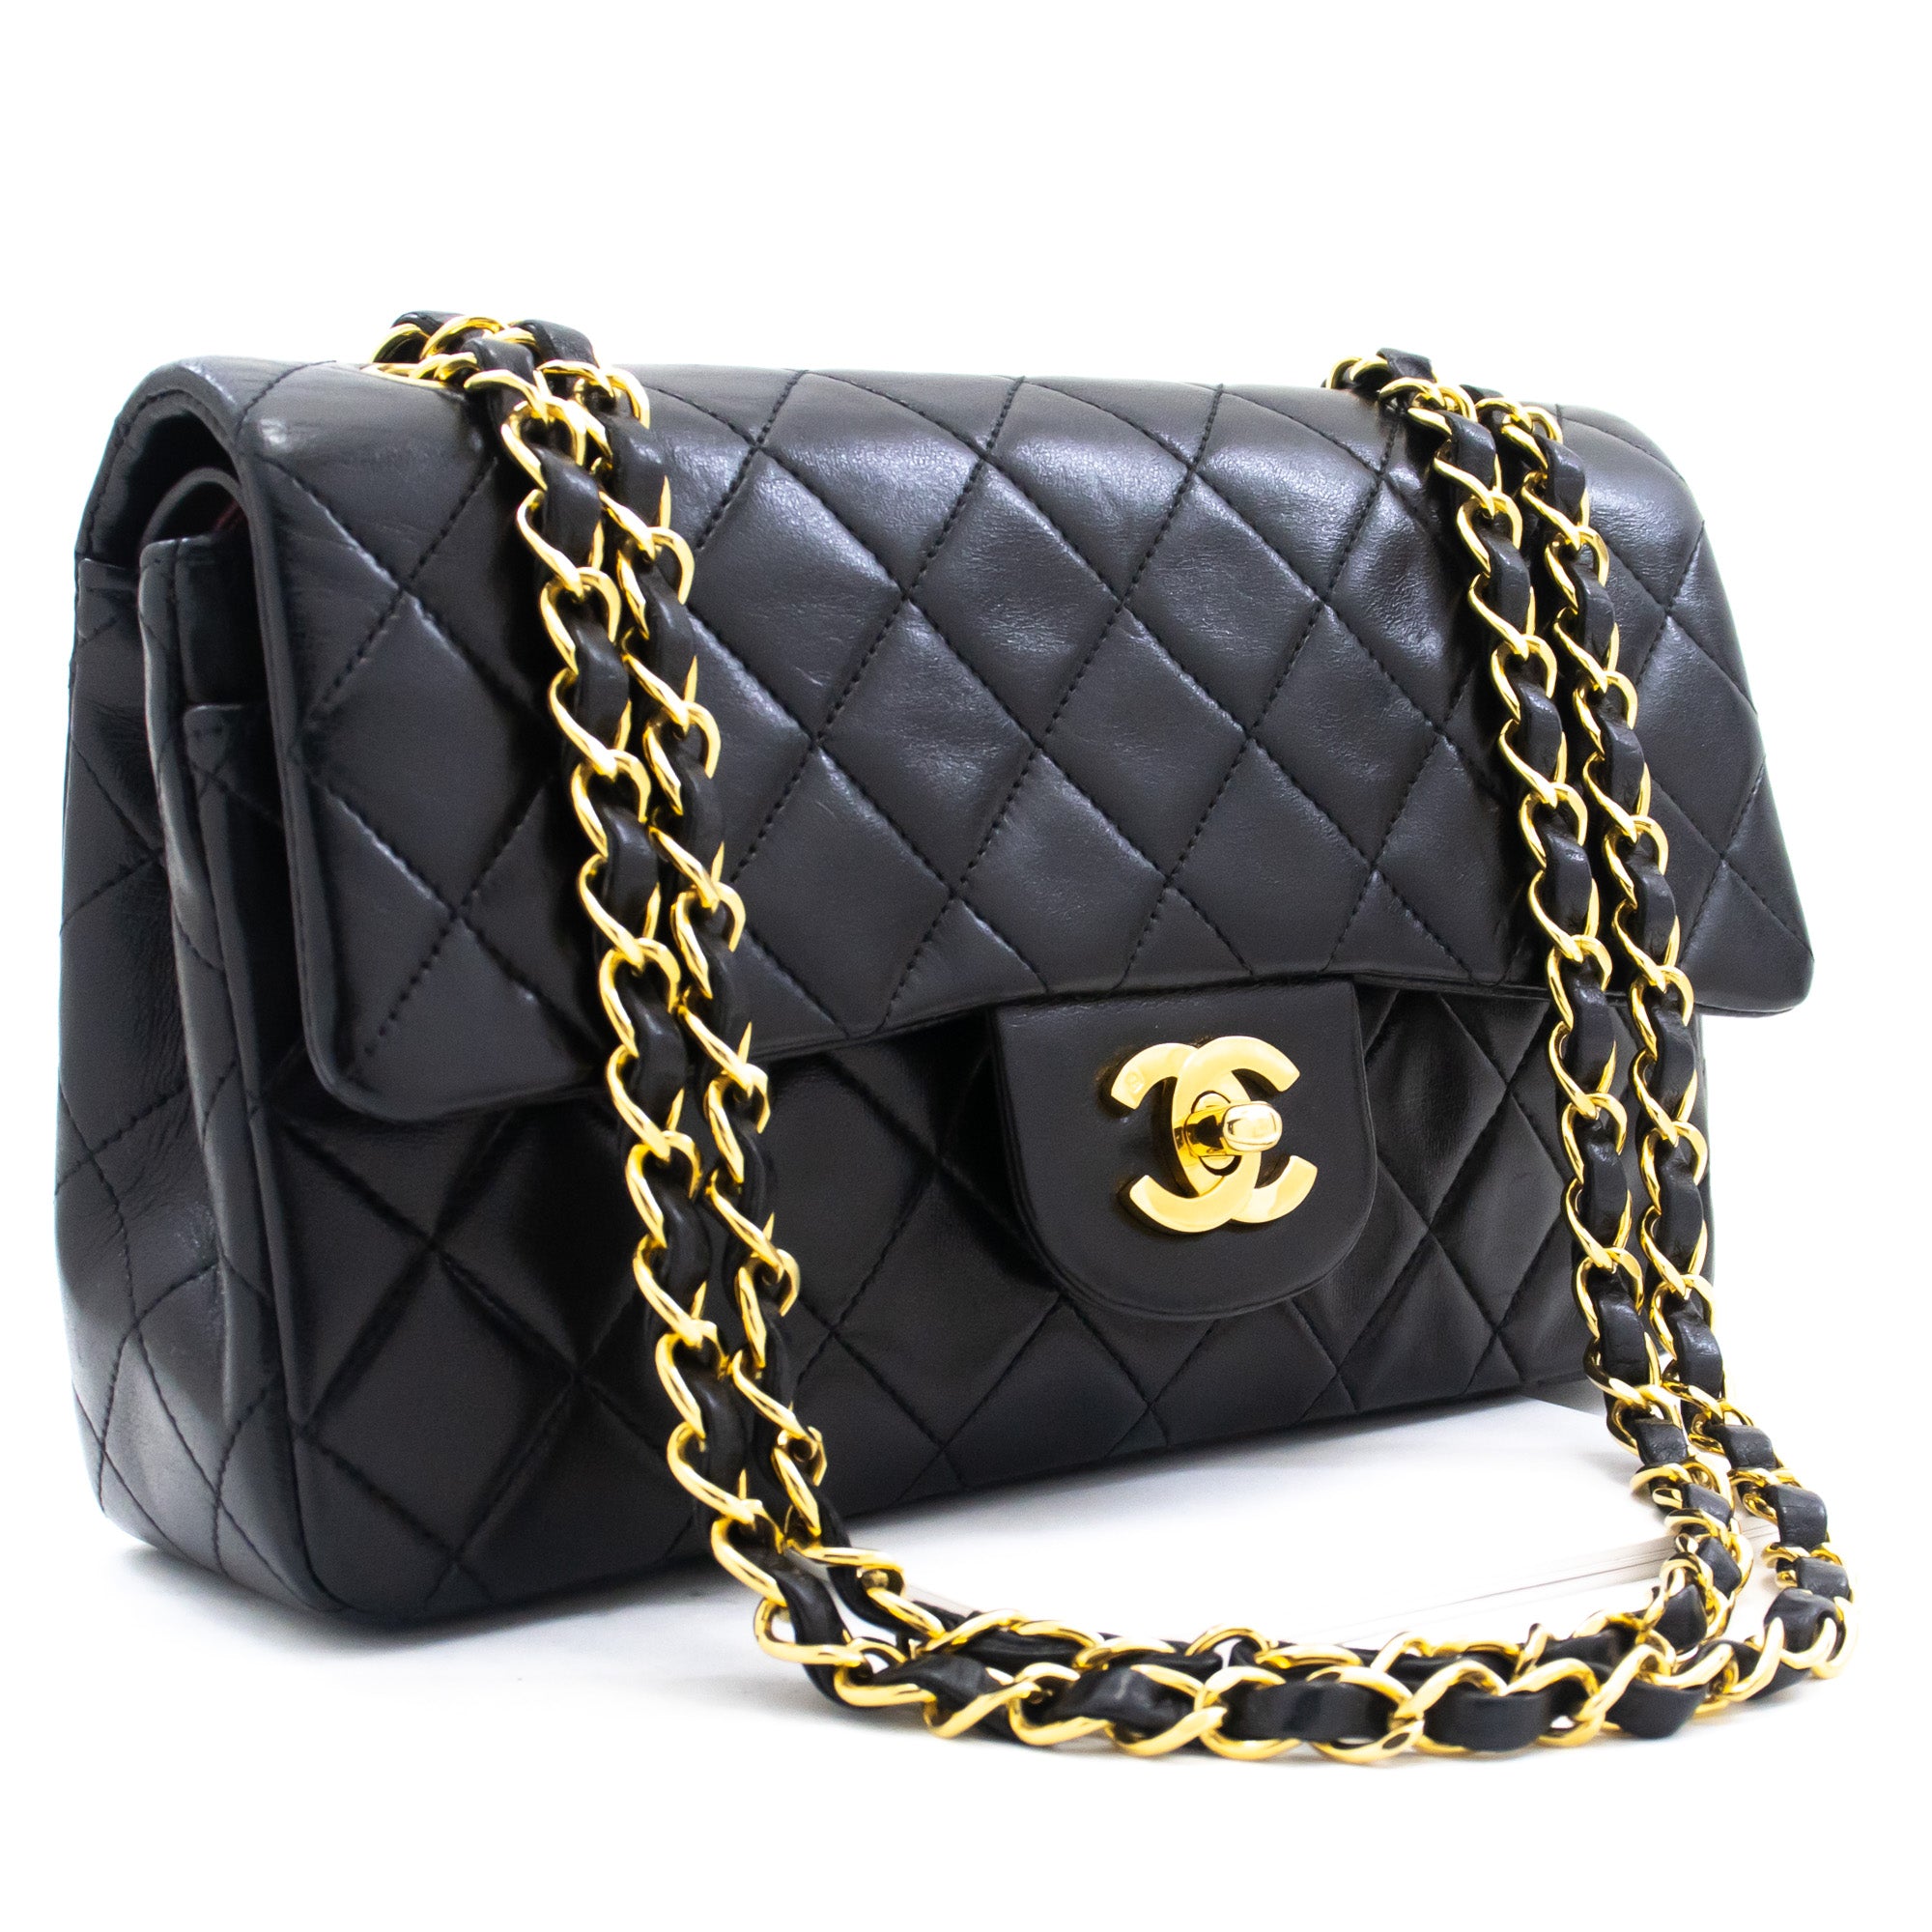 white patent leather chanel bag black